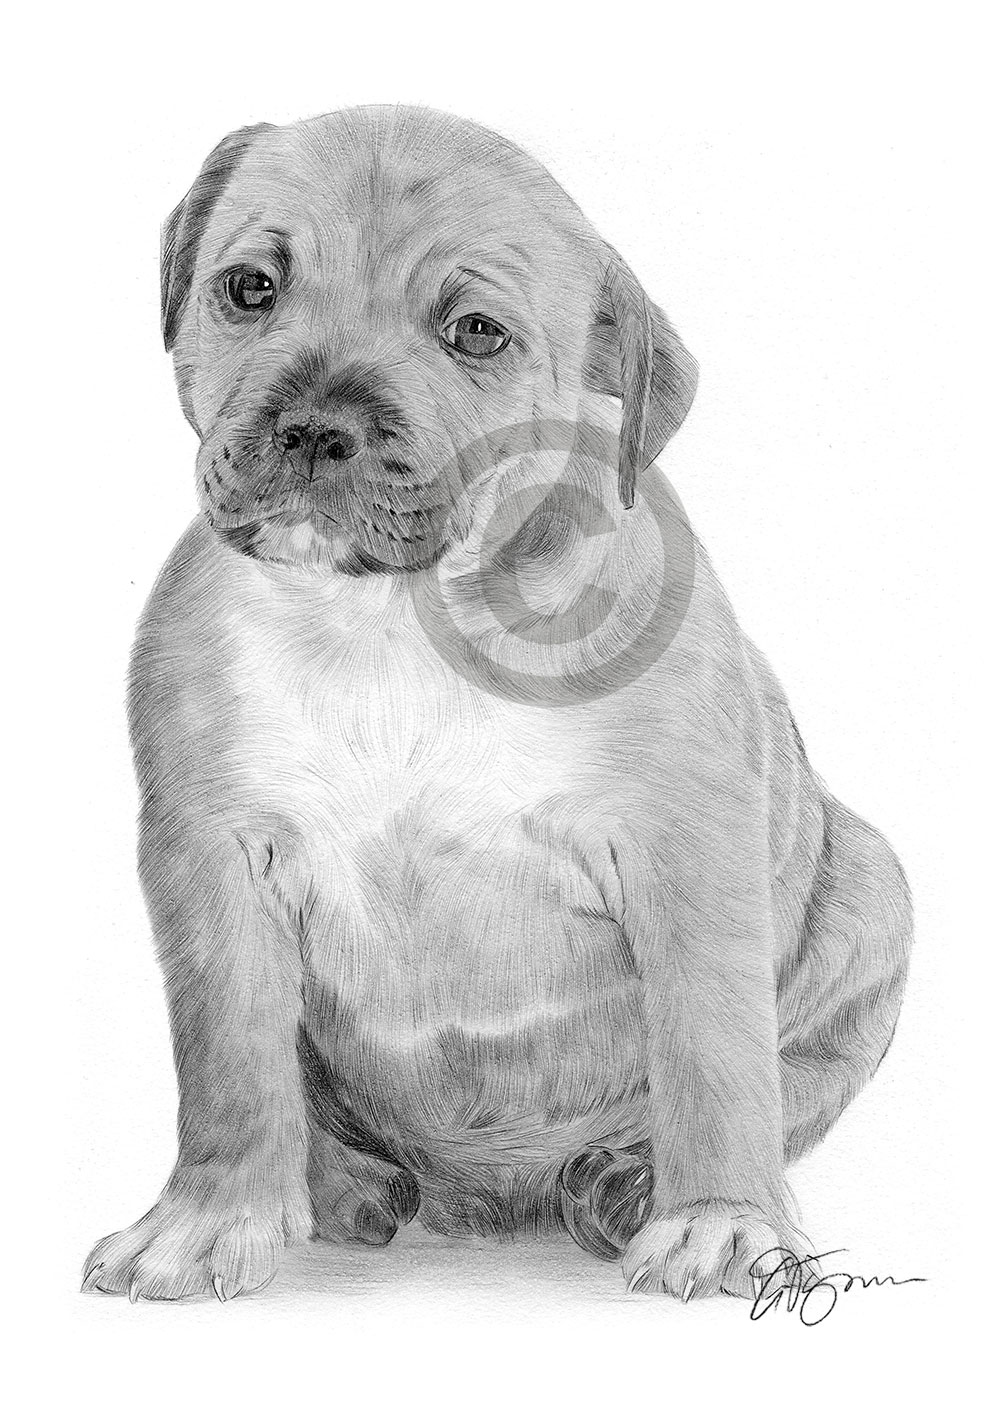 Pencil drawing of a Staffordshire Bull Terrier puppy by artist Gary Tymon